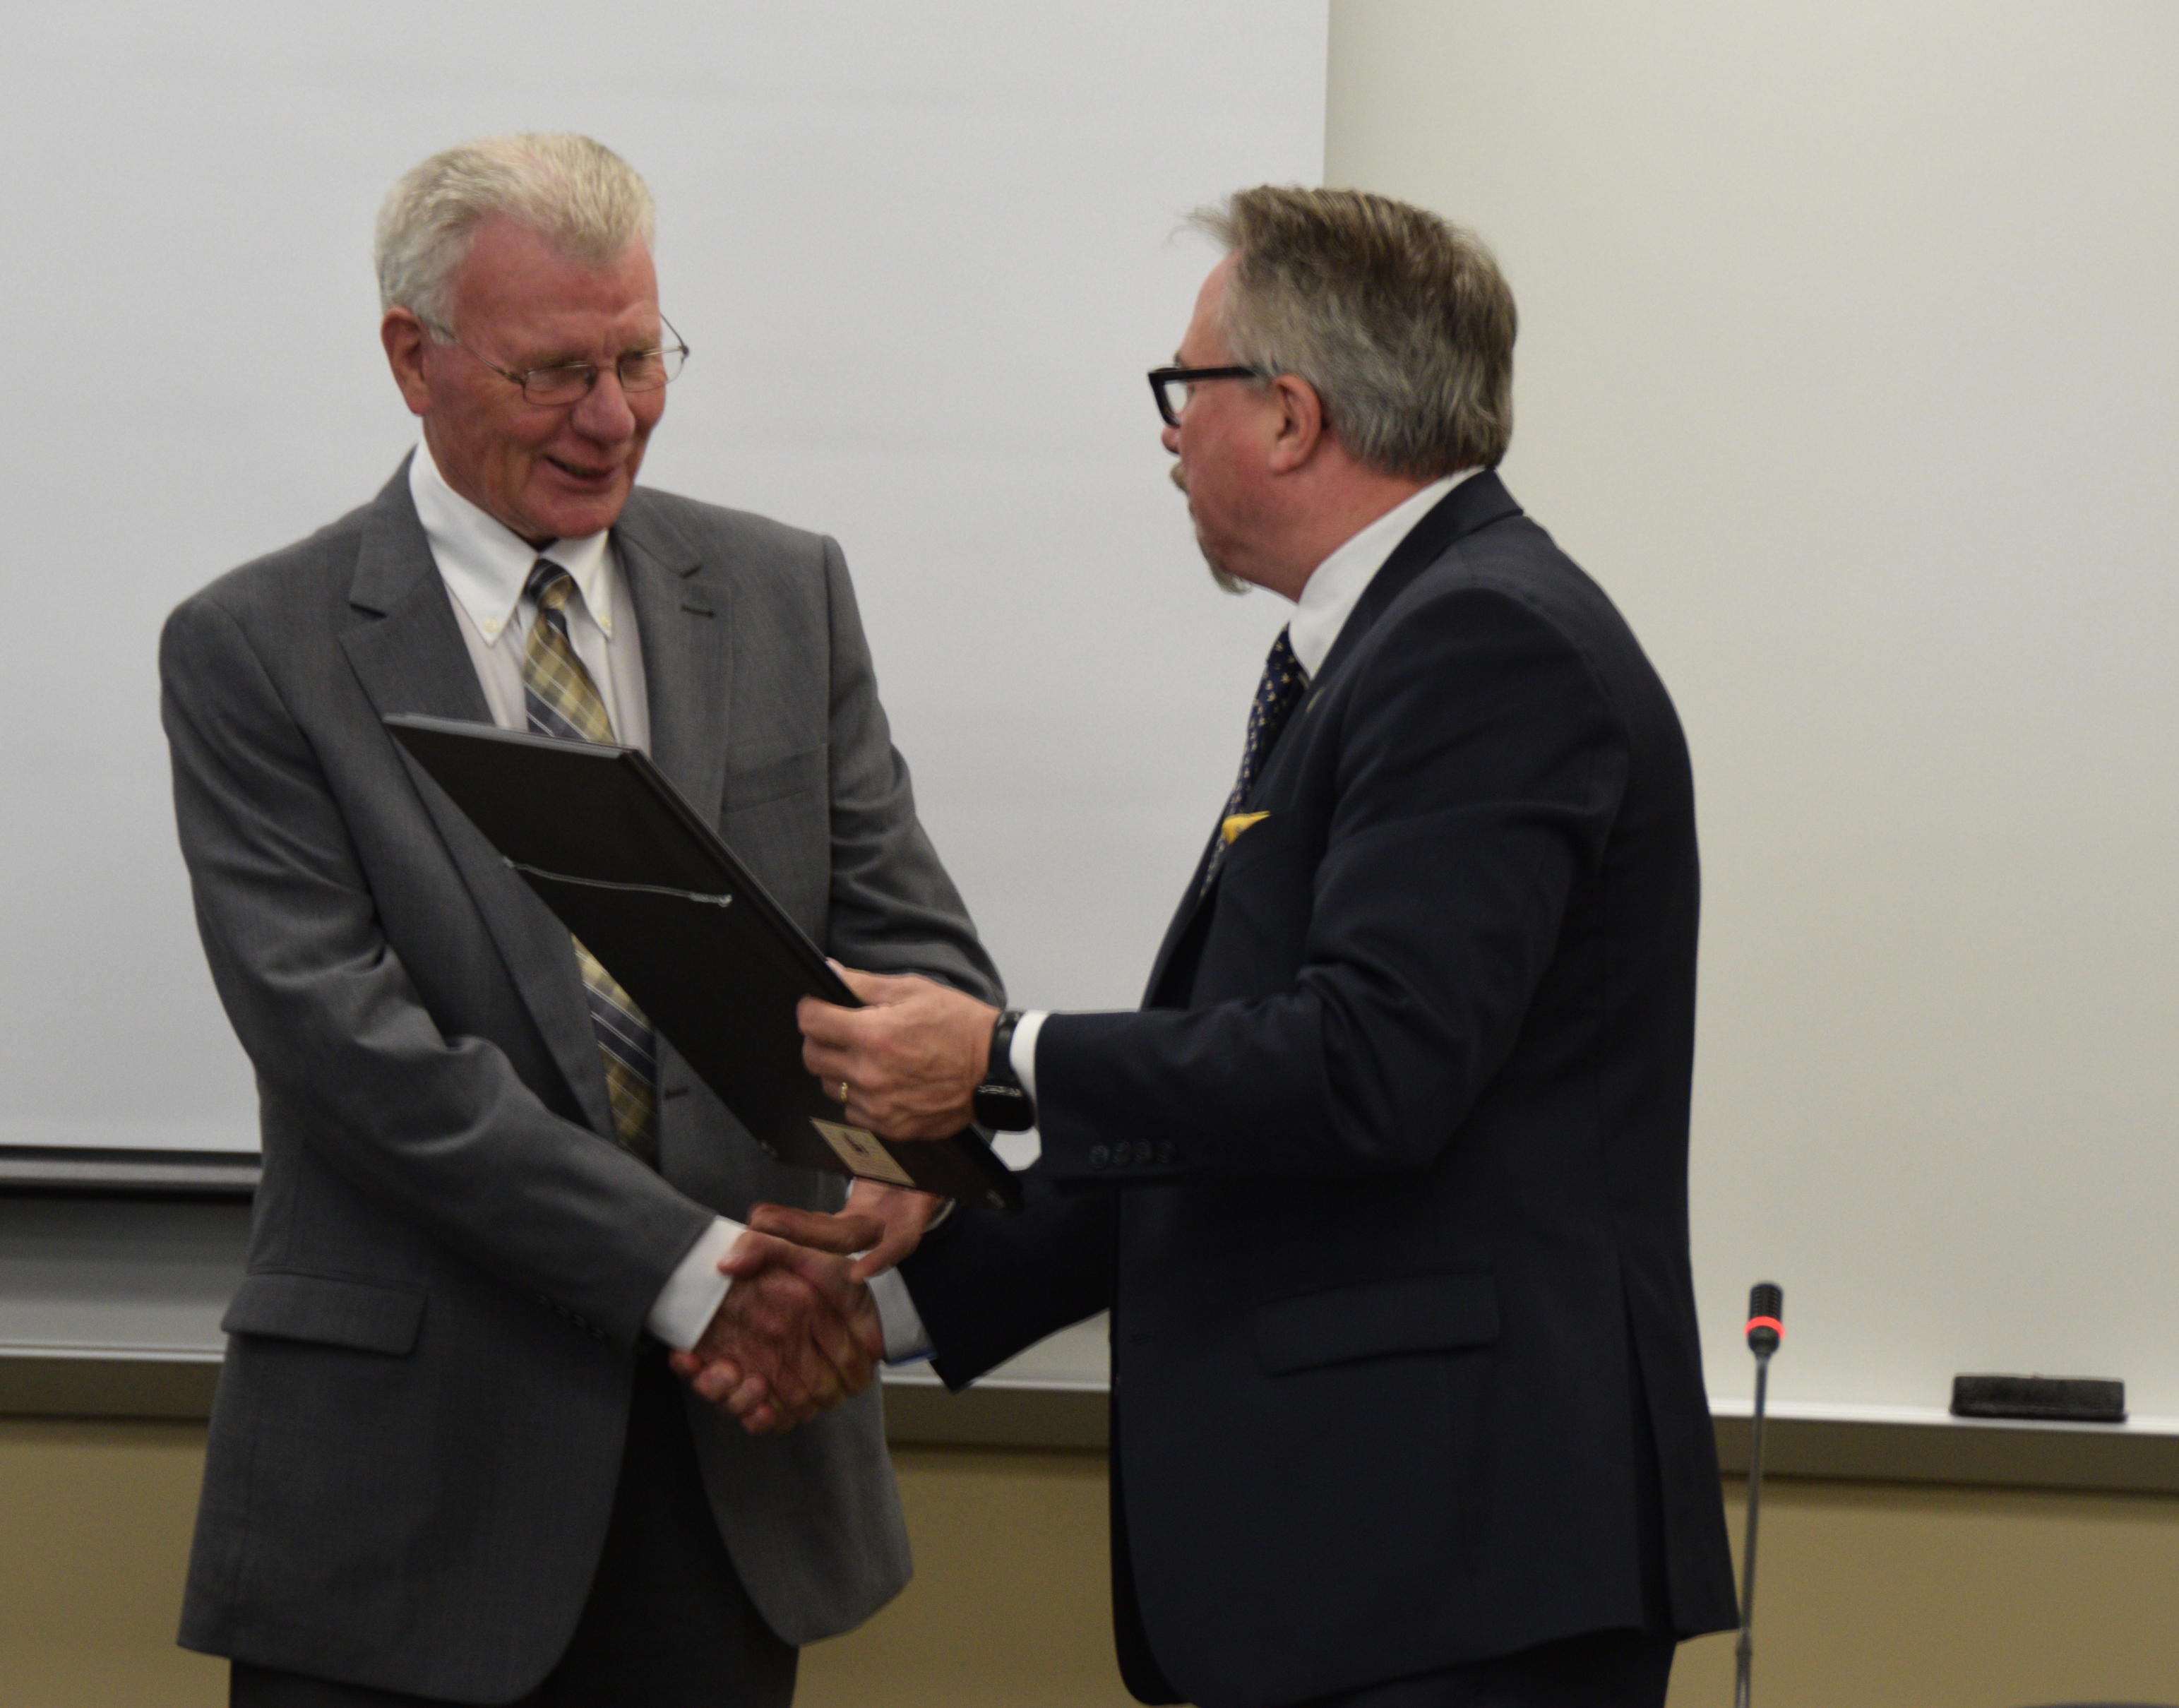 VU President Dr. Chuck Johnson presents Trustee George Ridgway with a resolution of appreciation